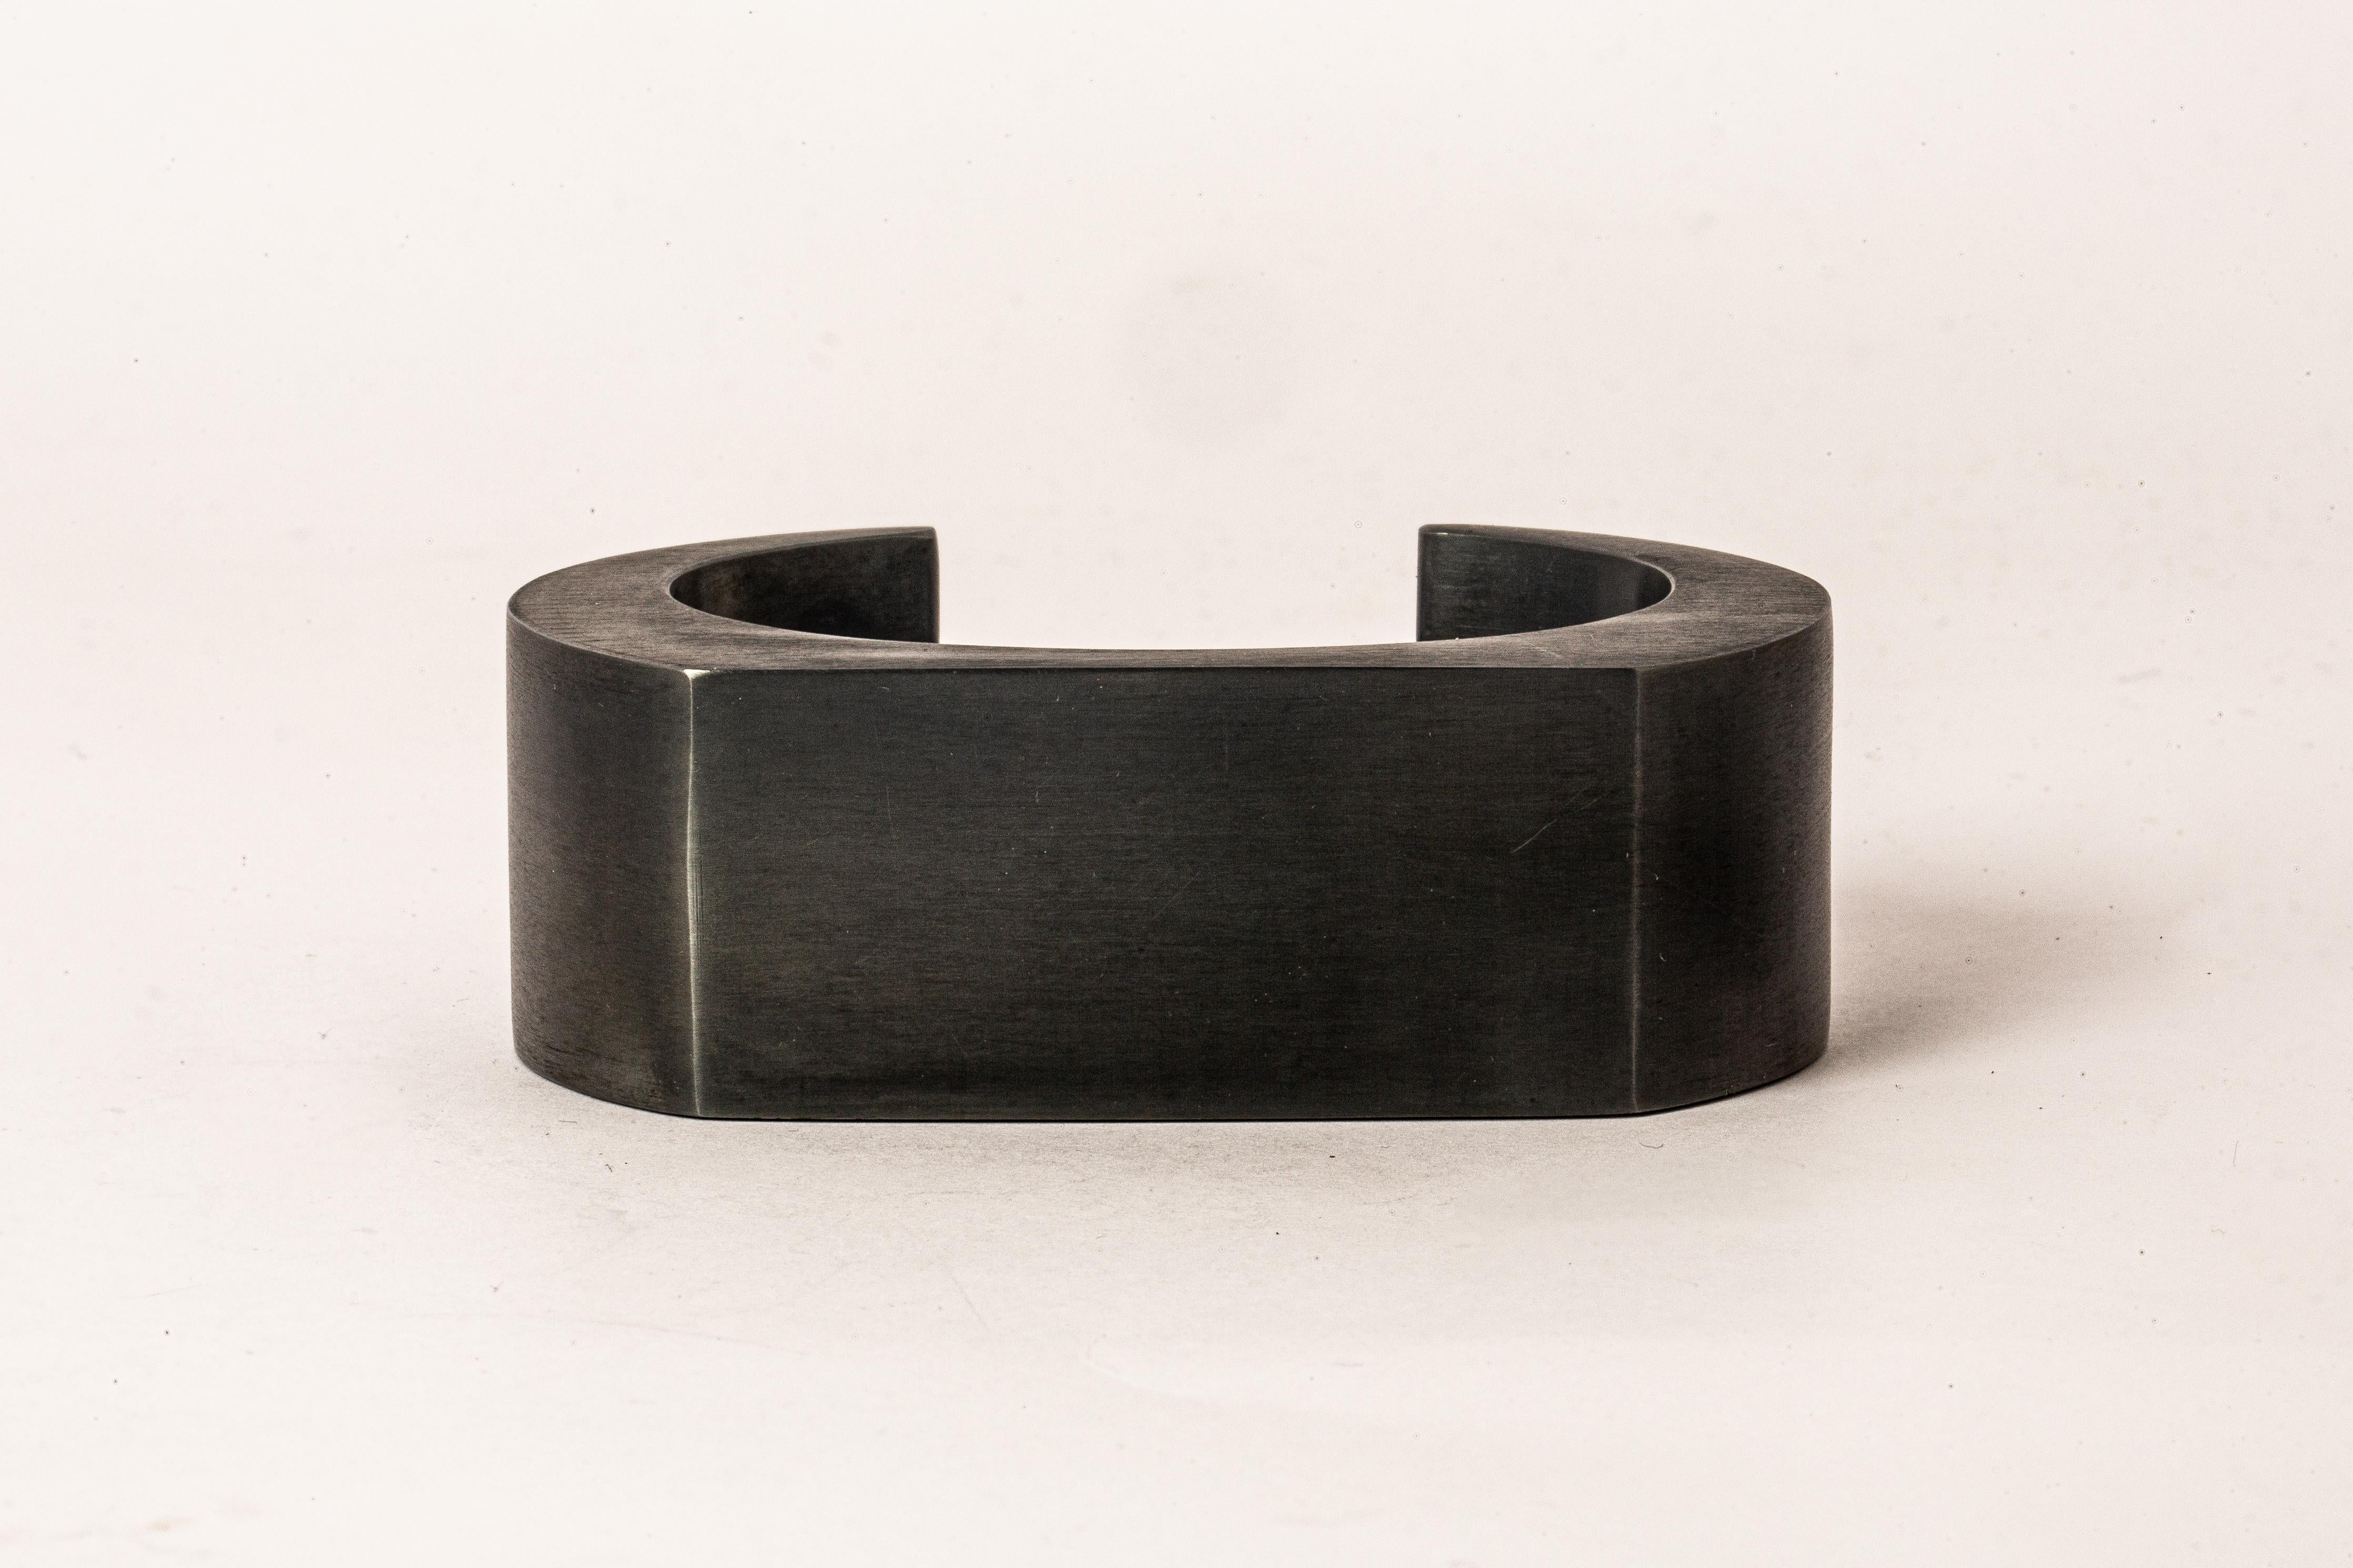 Crescent Plane Bracelet (30mm, KA) In New Condition For Sale In Hong Kong, Hong Kong Island